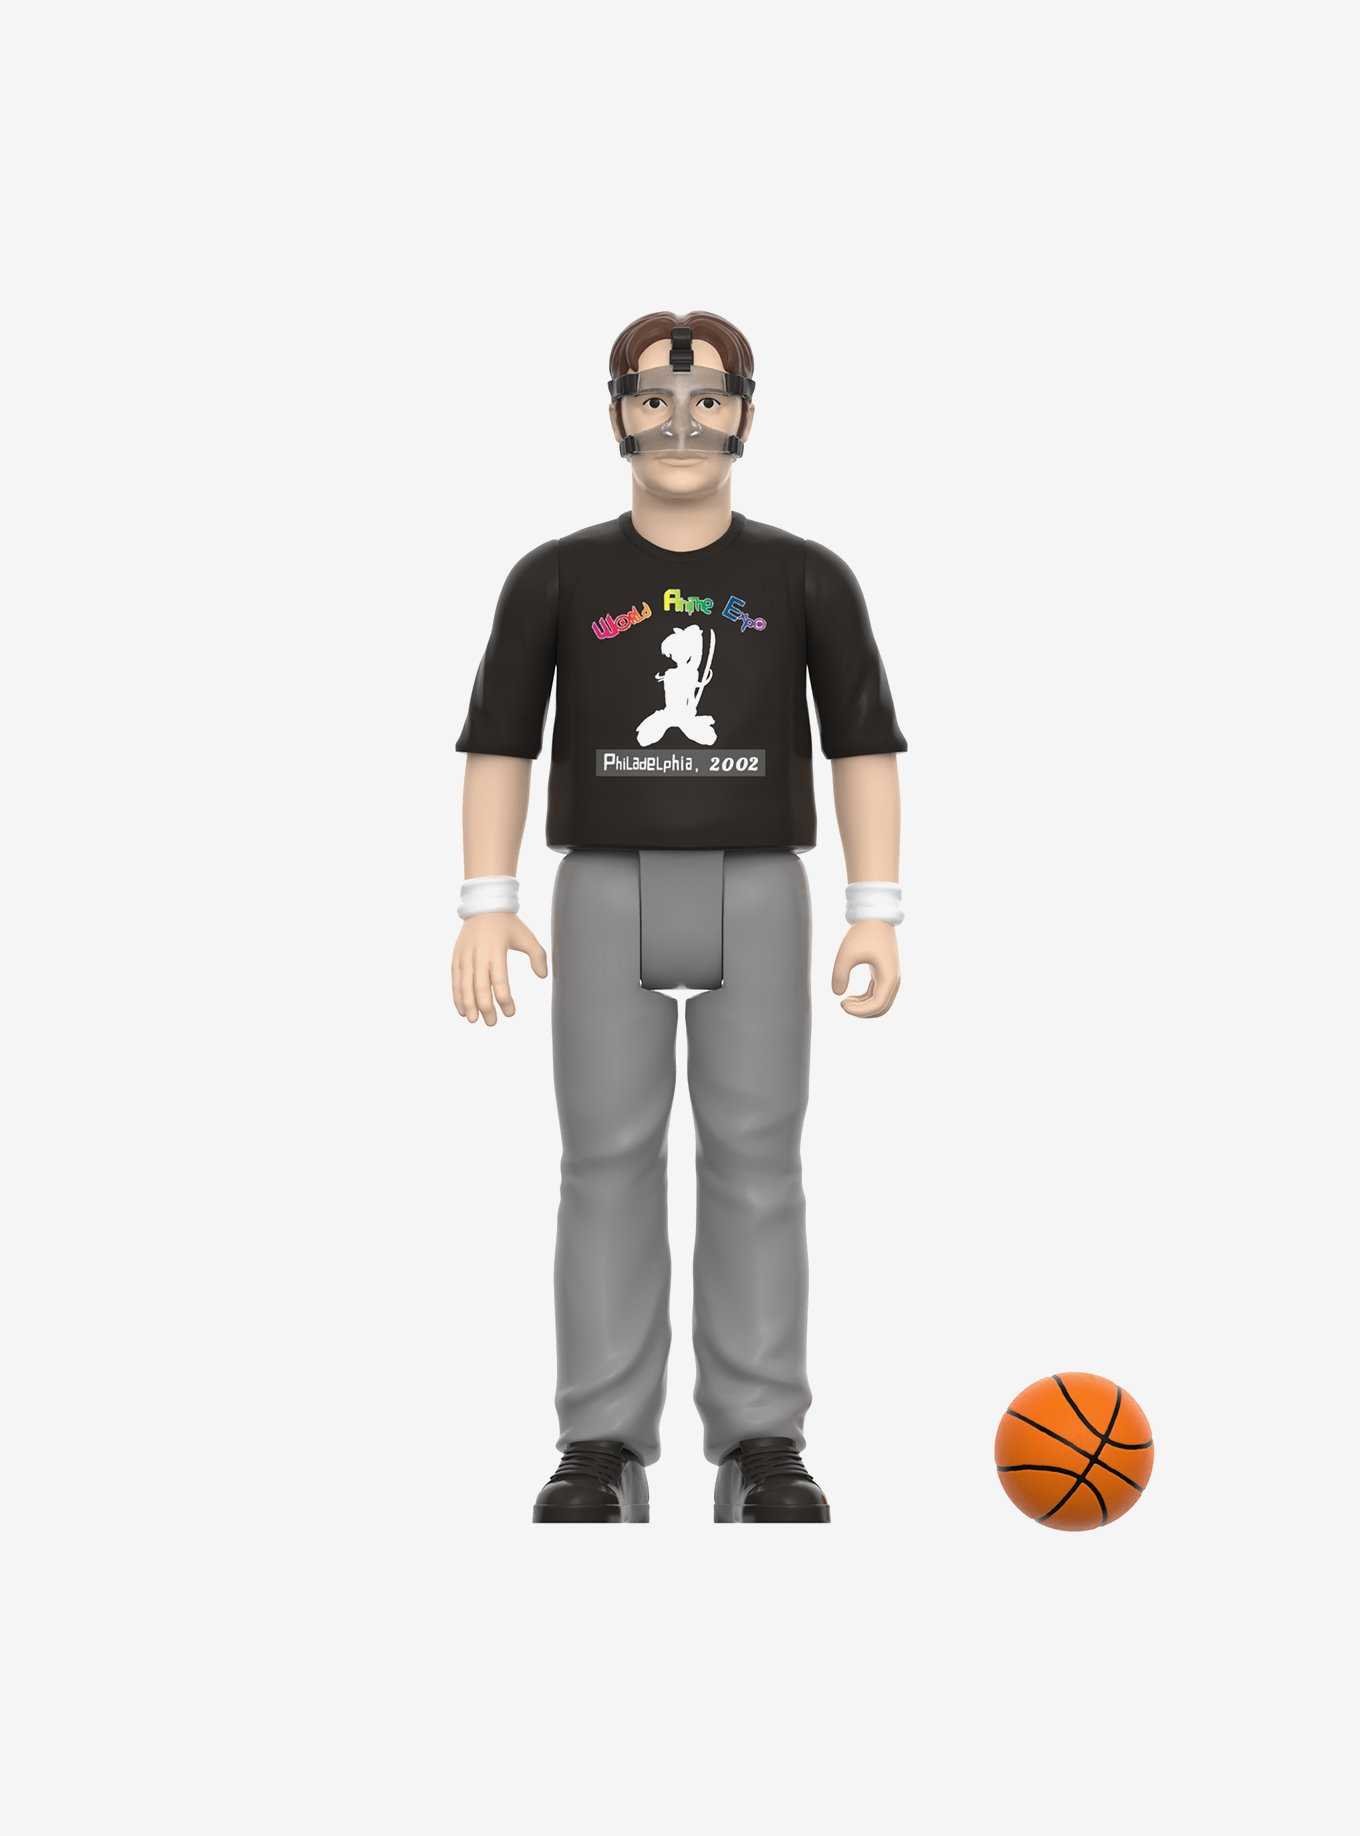 Super7 ReAction The Office Dwight Schrute Basketball Figure, , hi-res